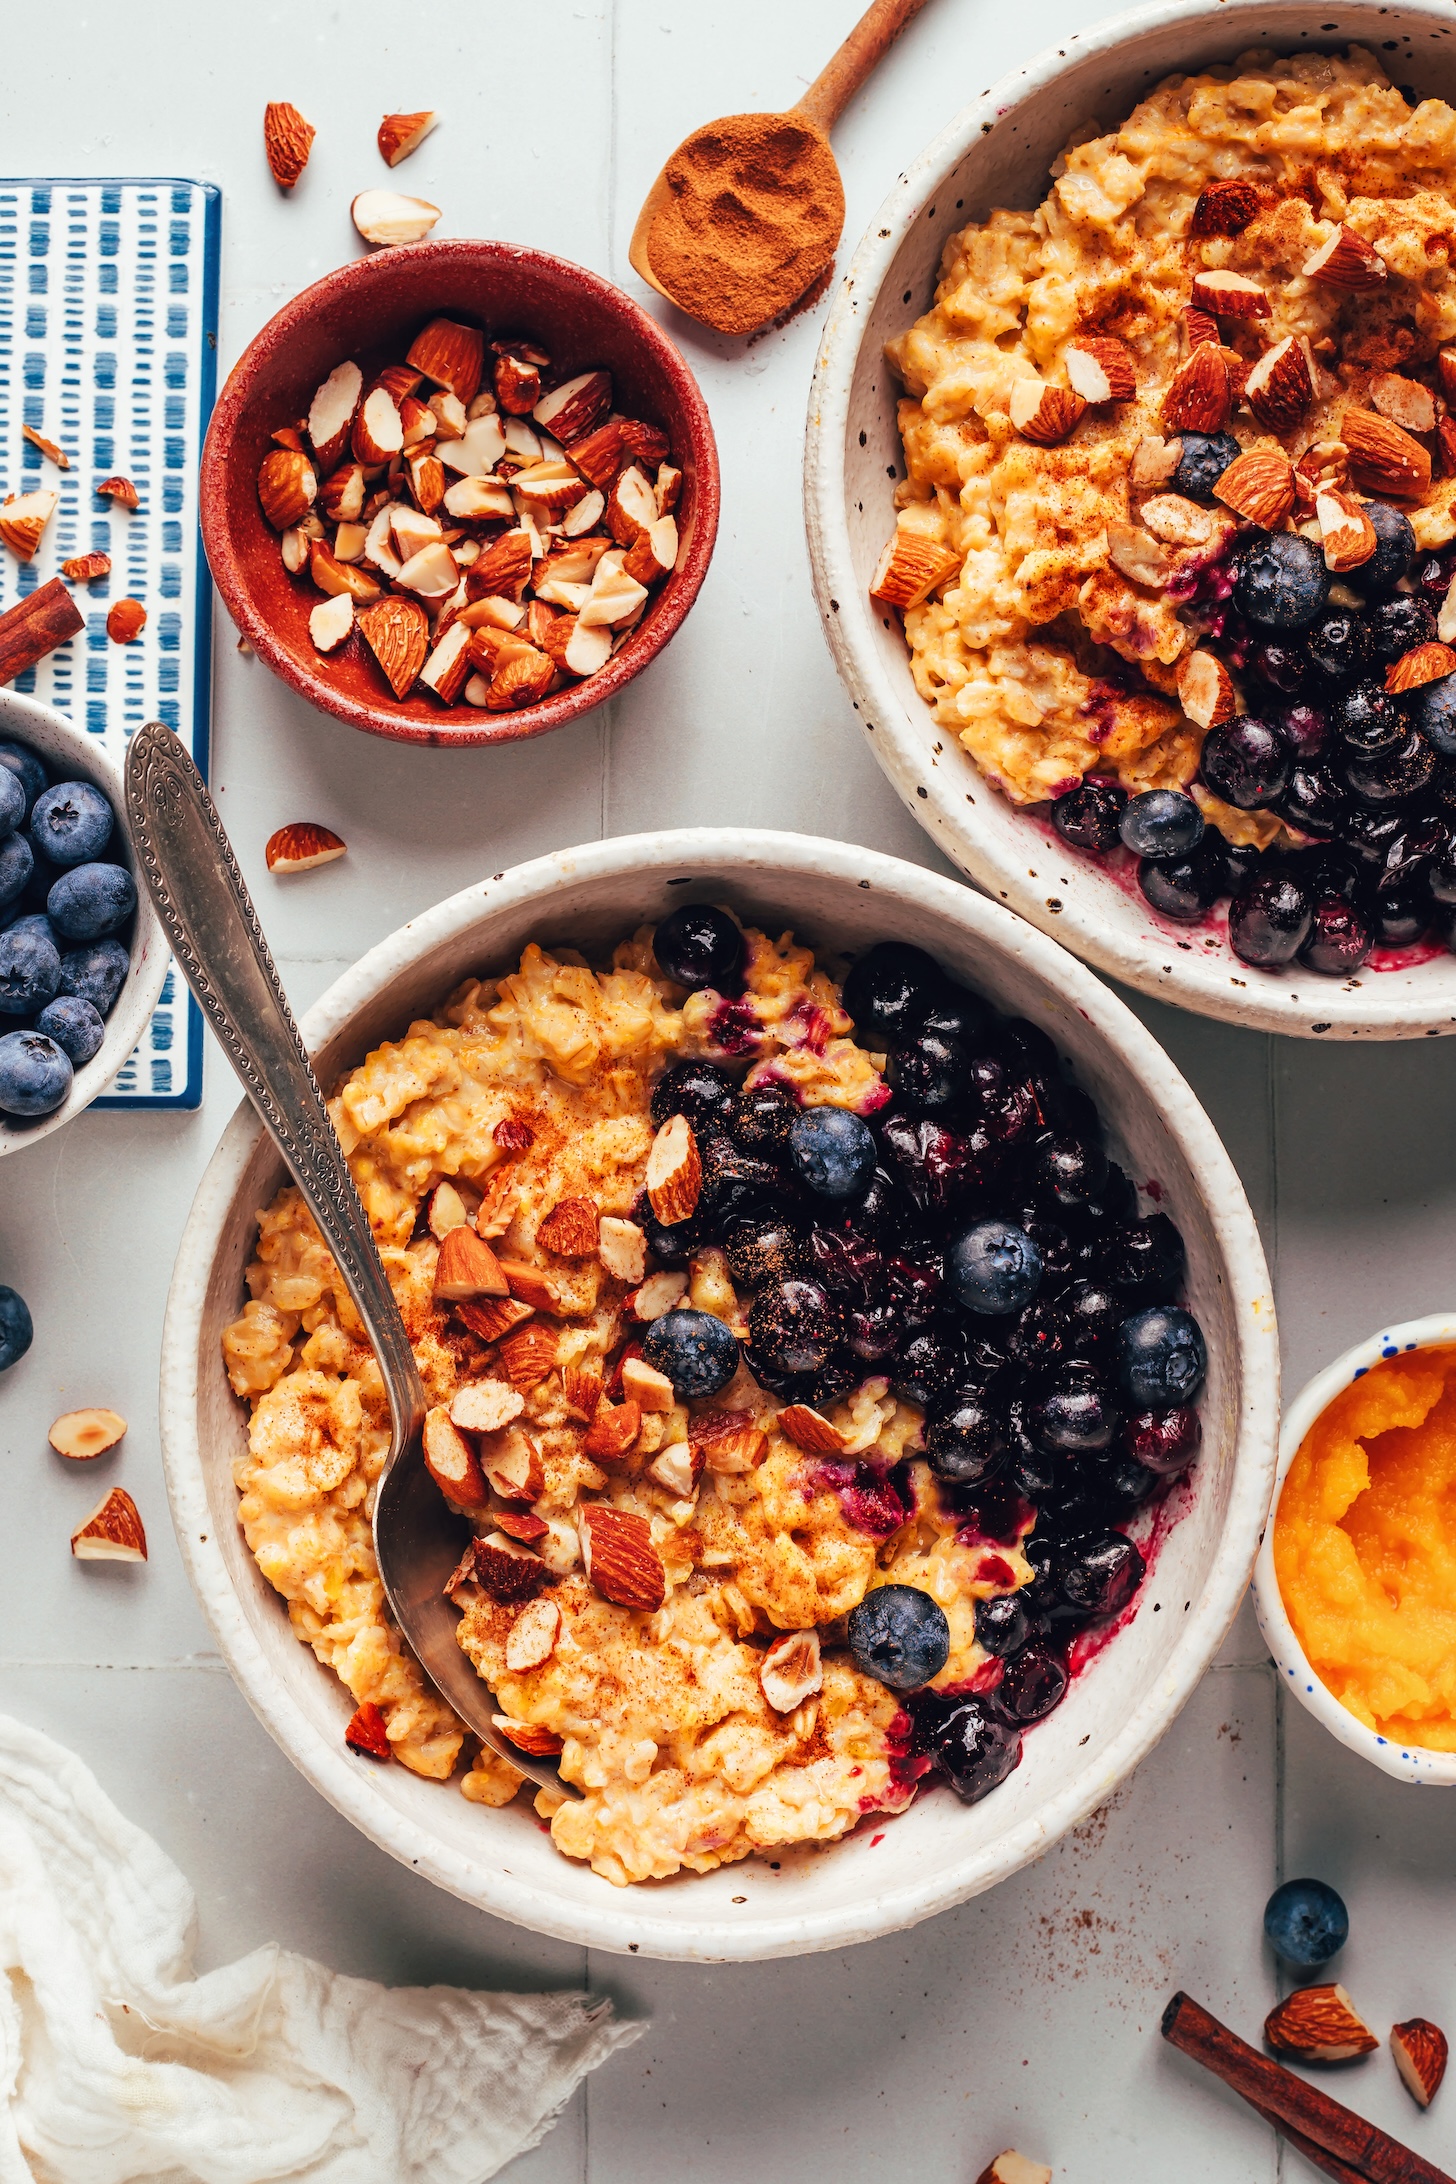 Bowls of pumpkin purée, almonds, and blueberries next to bowls of our creamy pumpkin oats recipe